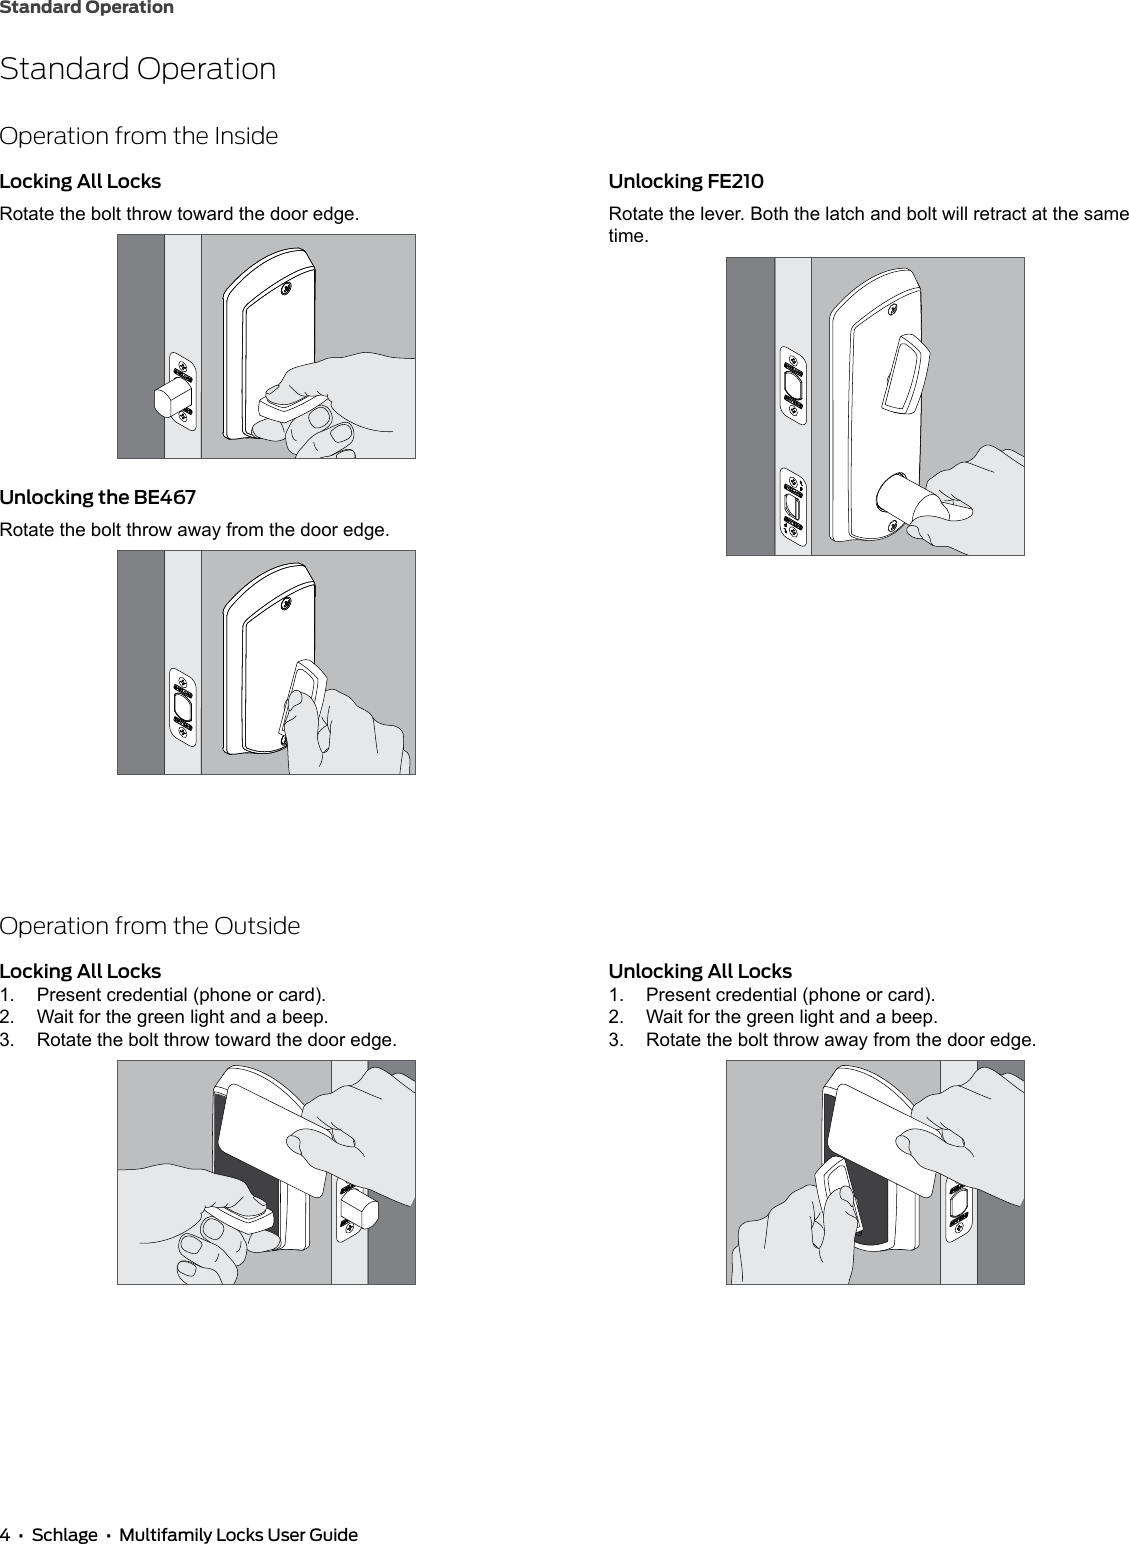 4  •  Schlage  •  Multifamily Locks User GuideStandard OperationStandard OperationOperation from the InsideLocking All LocksRotate the bolt throw toward the door edge.Unlocking the BE467Rotate the bolt throw away from the door edge.Unlocking FE210Rotate the lever. Both the latch and bolt will retract at the same time.Operation from the OutsideLocking All Locks1.  Present credential (phone or card).2.  Wait for the green light and a beep.3.  Rotate the bolt throw toward the door edge.Unlocking All Locks1.  Present credential (phone or card).2.  Wait for the green light and a beep.3.  Rotate the bolt throw away from the door edge.